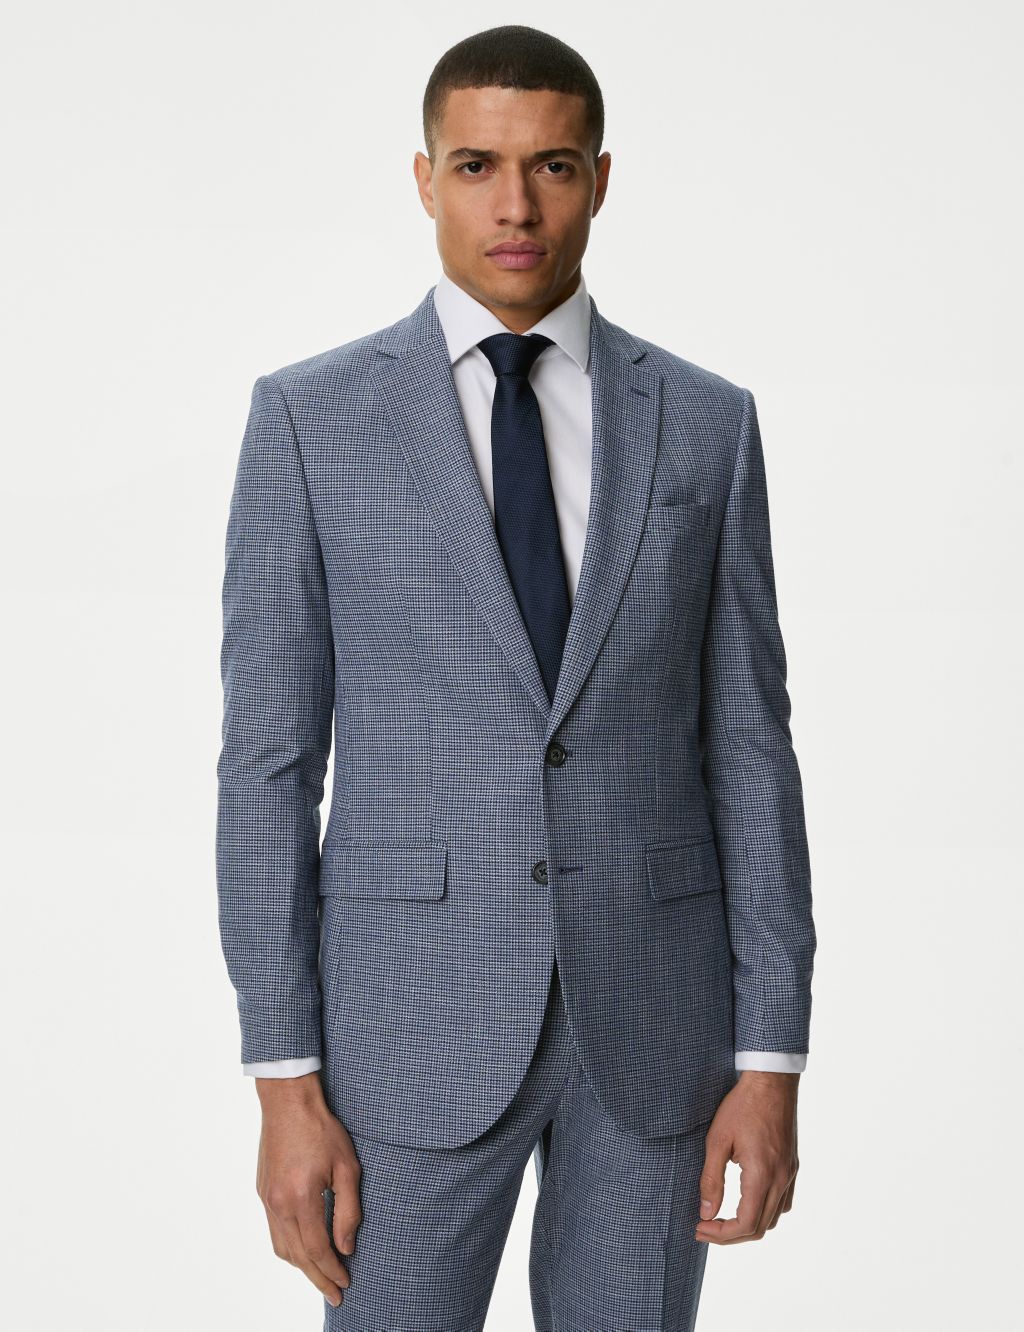 Slim Fit Puppytooth Stretch Suit Jacket | M&S Collection | M&S